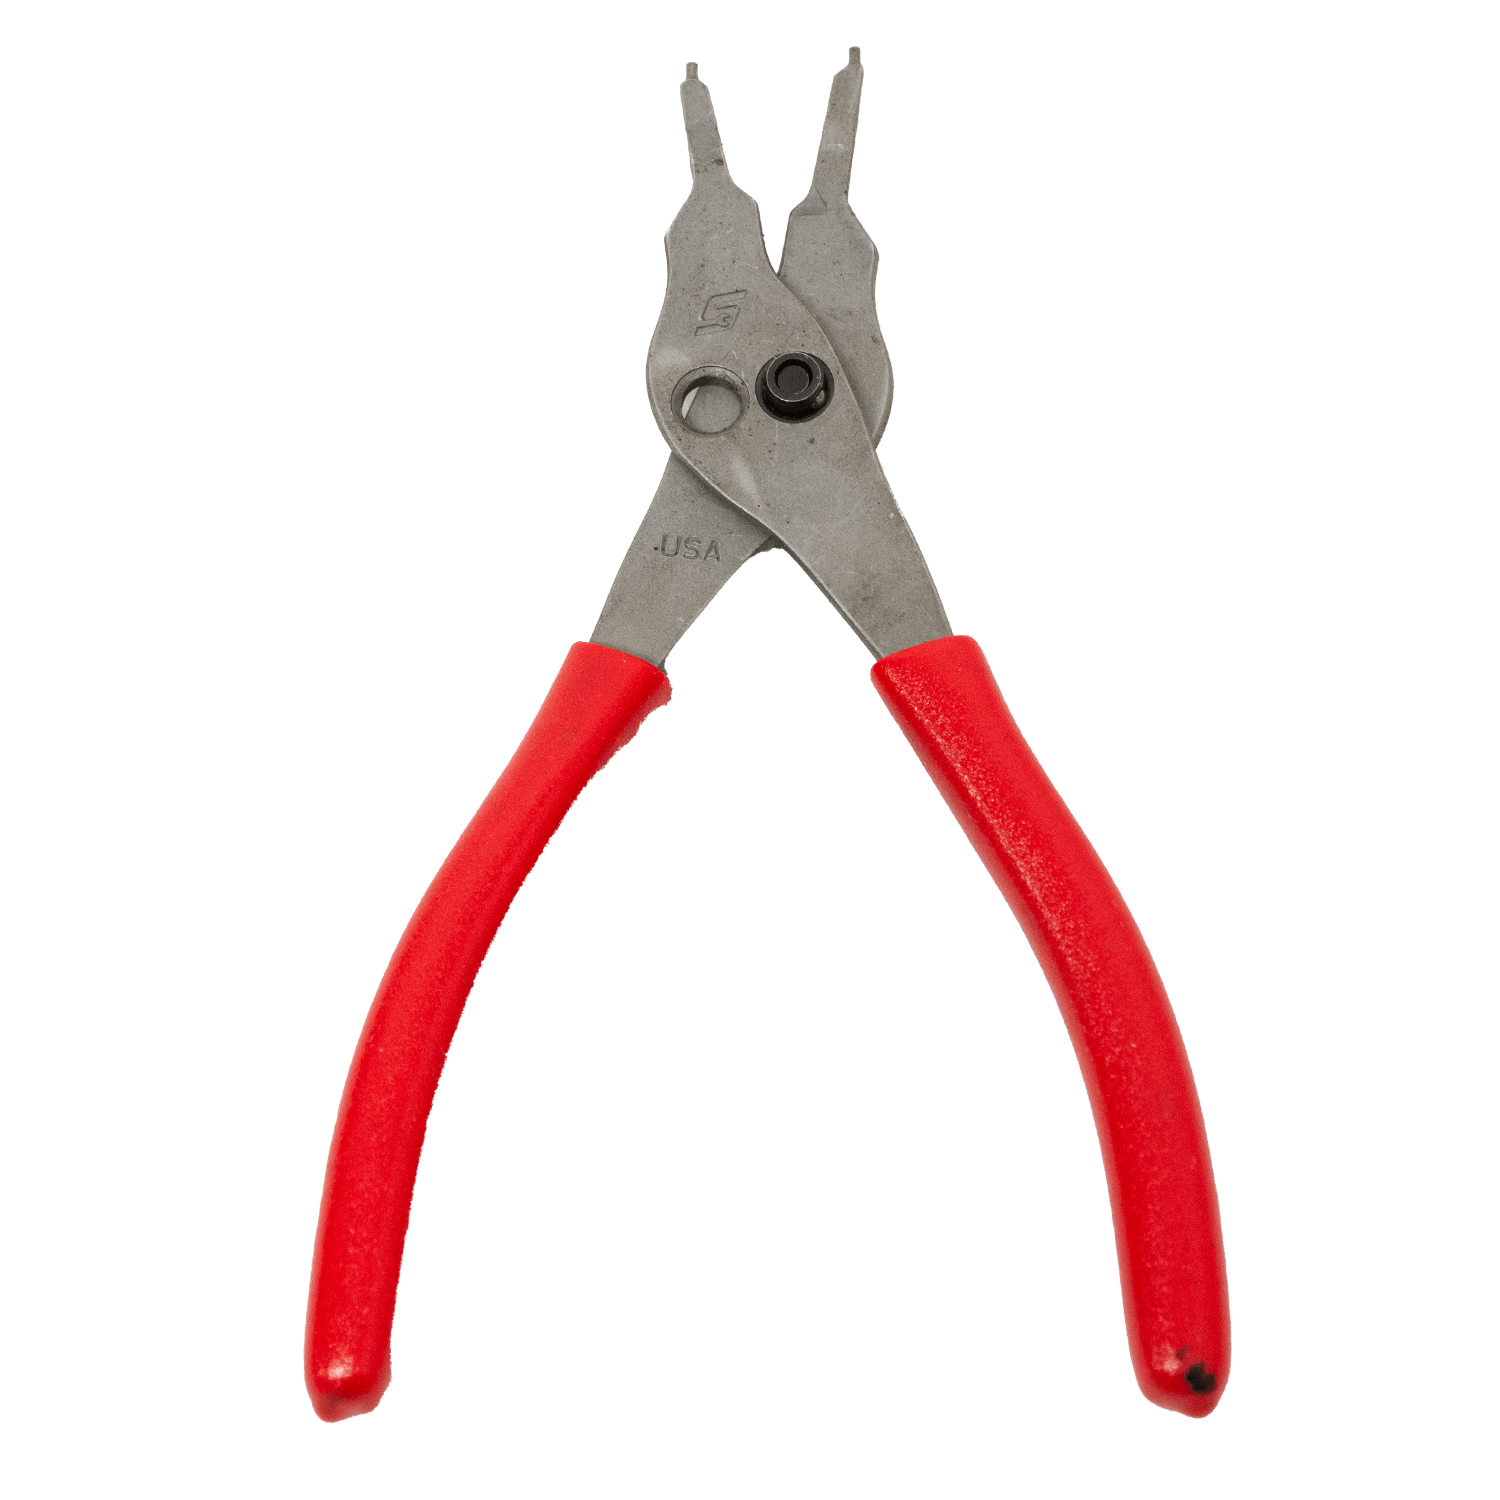 Snap-on SRPCA7000 Release Pliers - ipawnishop.com